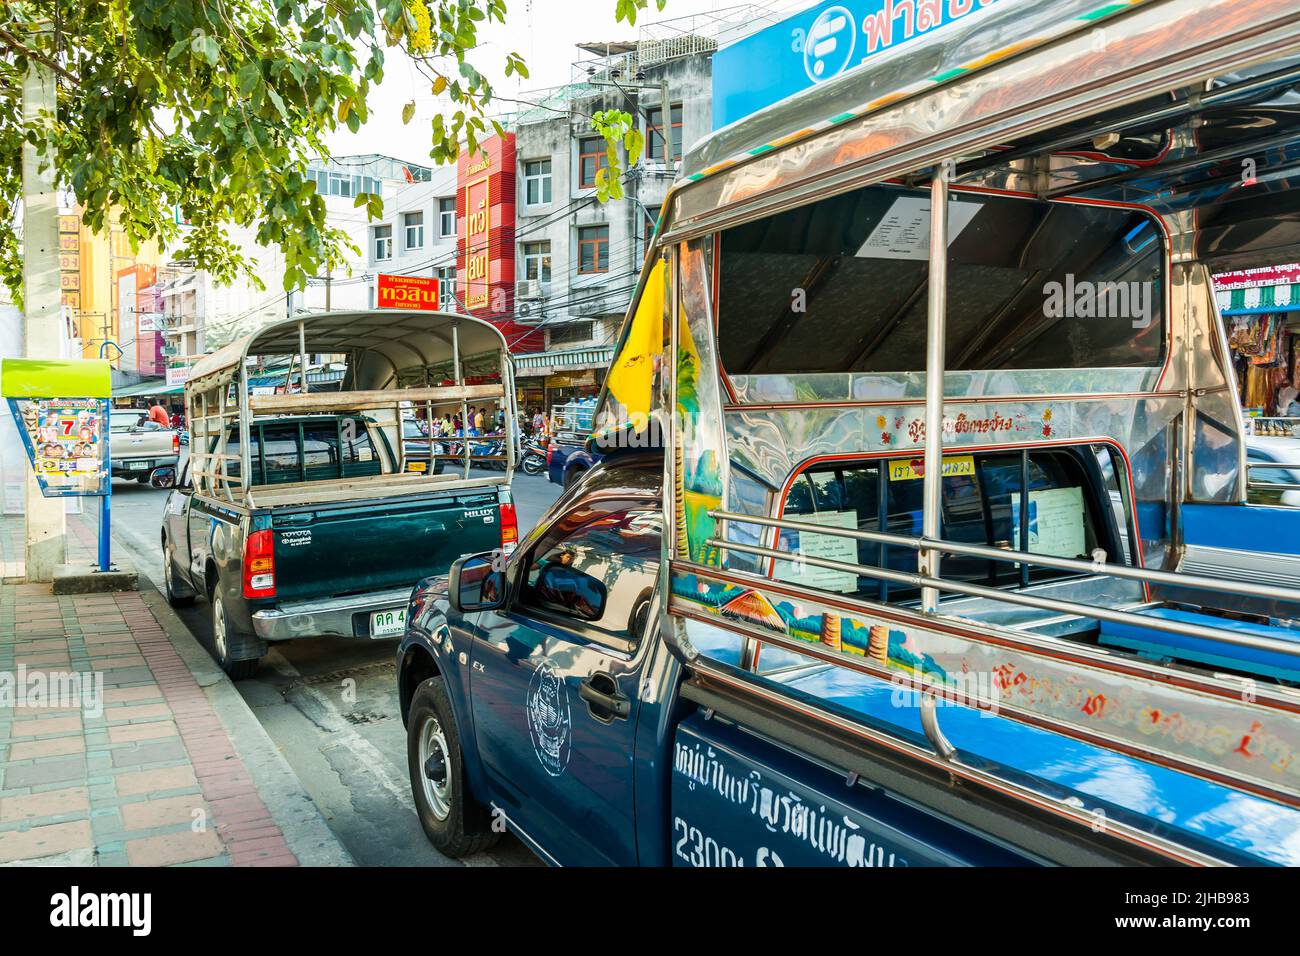 Pattaya, Thailand - December 4, 2009: Street with parked city songthaews in Pattaya Stock Photo